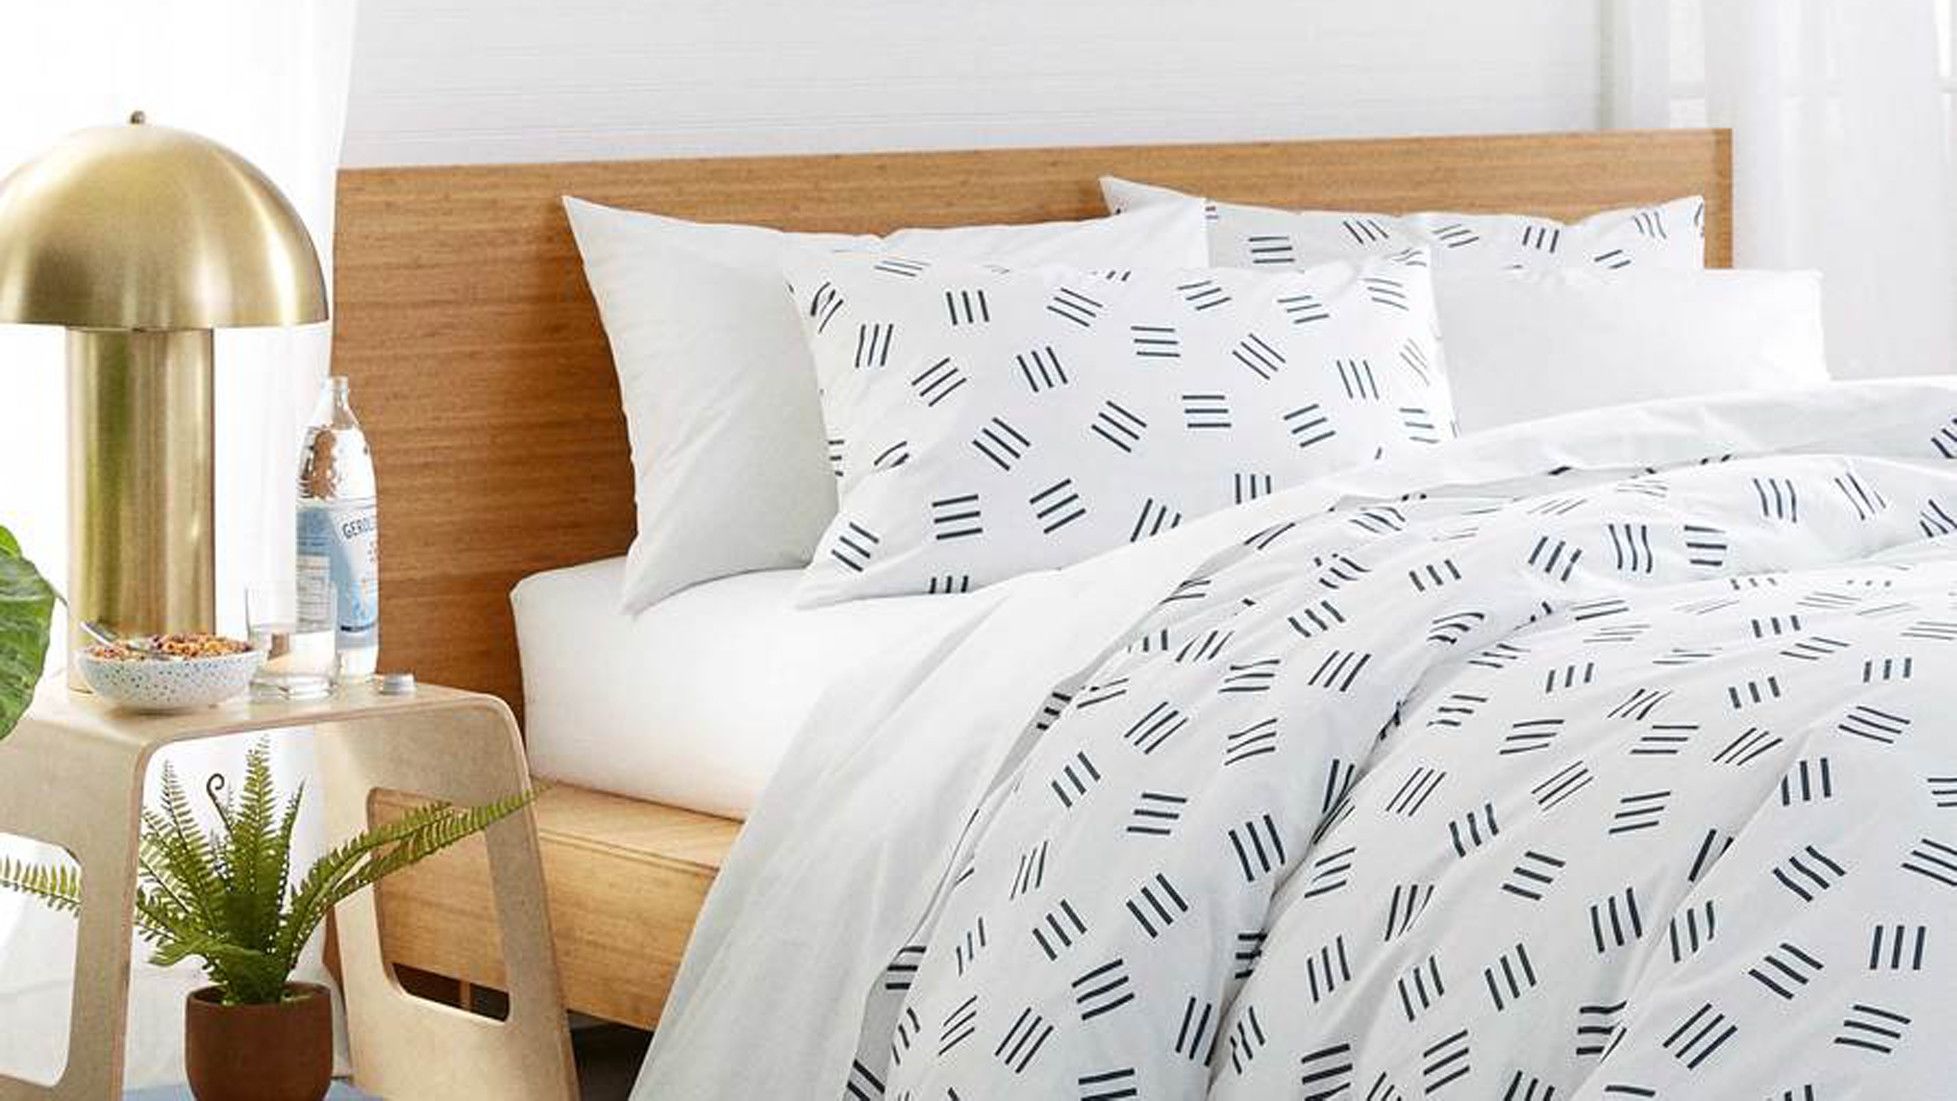 Brooklinen's Cooling Percale Sheet Set Is the Softest Bedding I've Tried